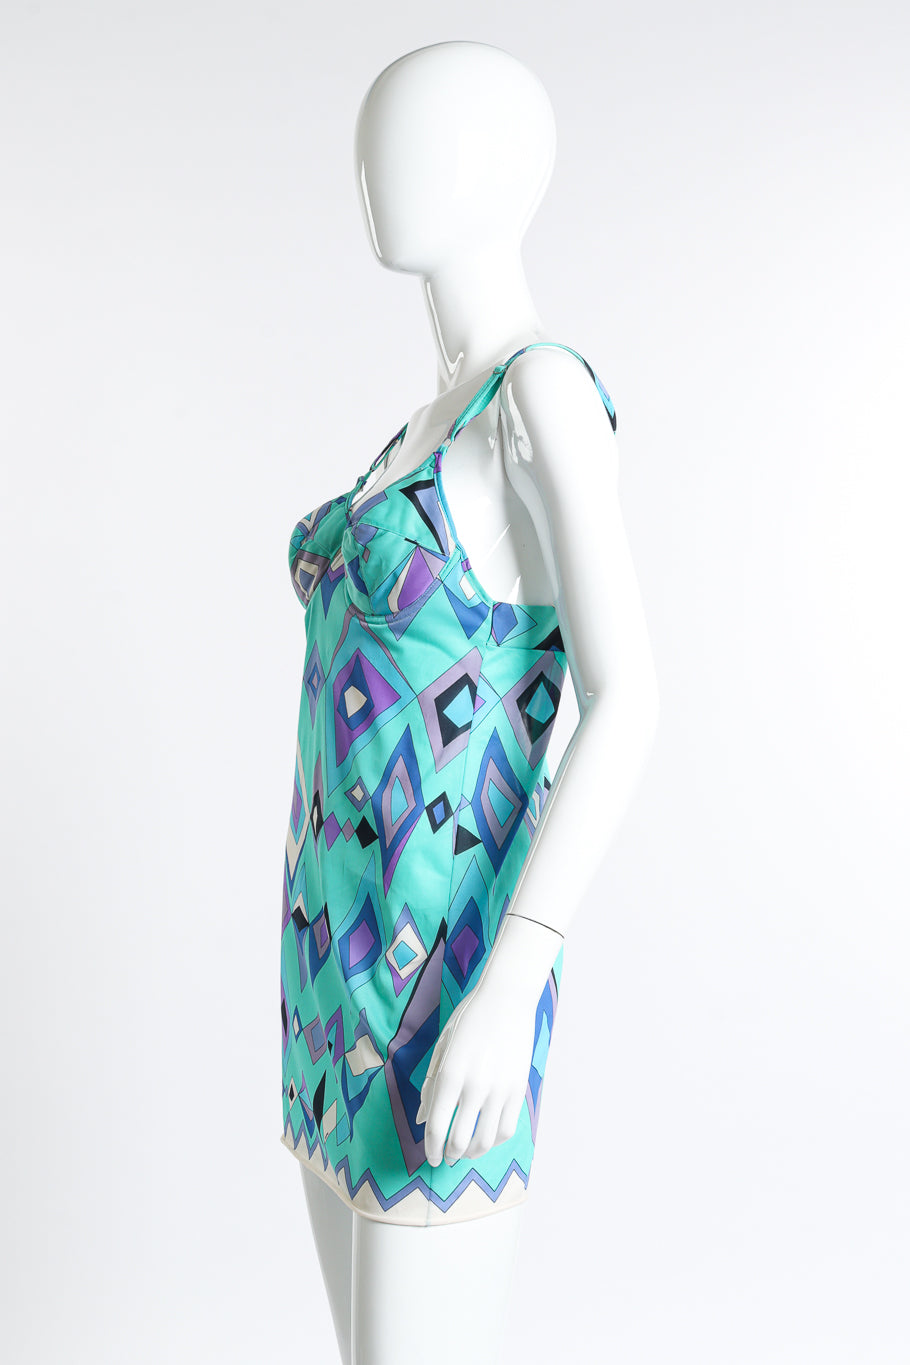 Vintage Emilio Pucci for Formfit Rogers teal purple and white geo chemise slip dress left side view as worn on mannequin @Recess LA